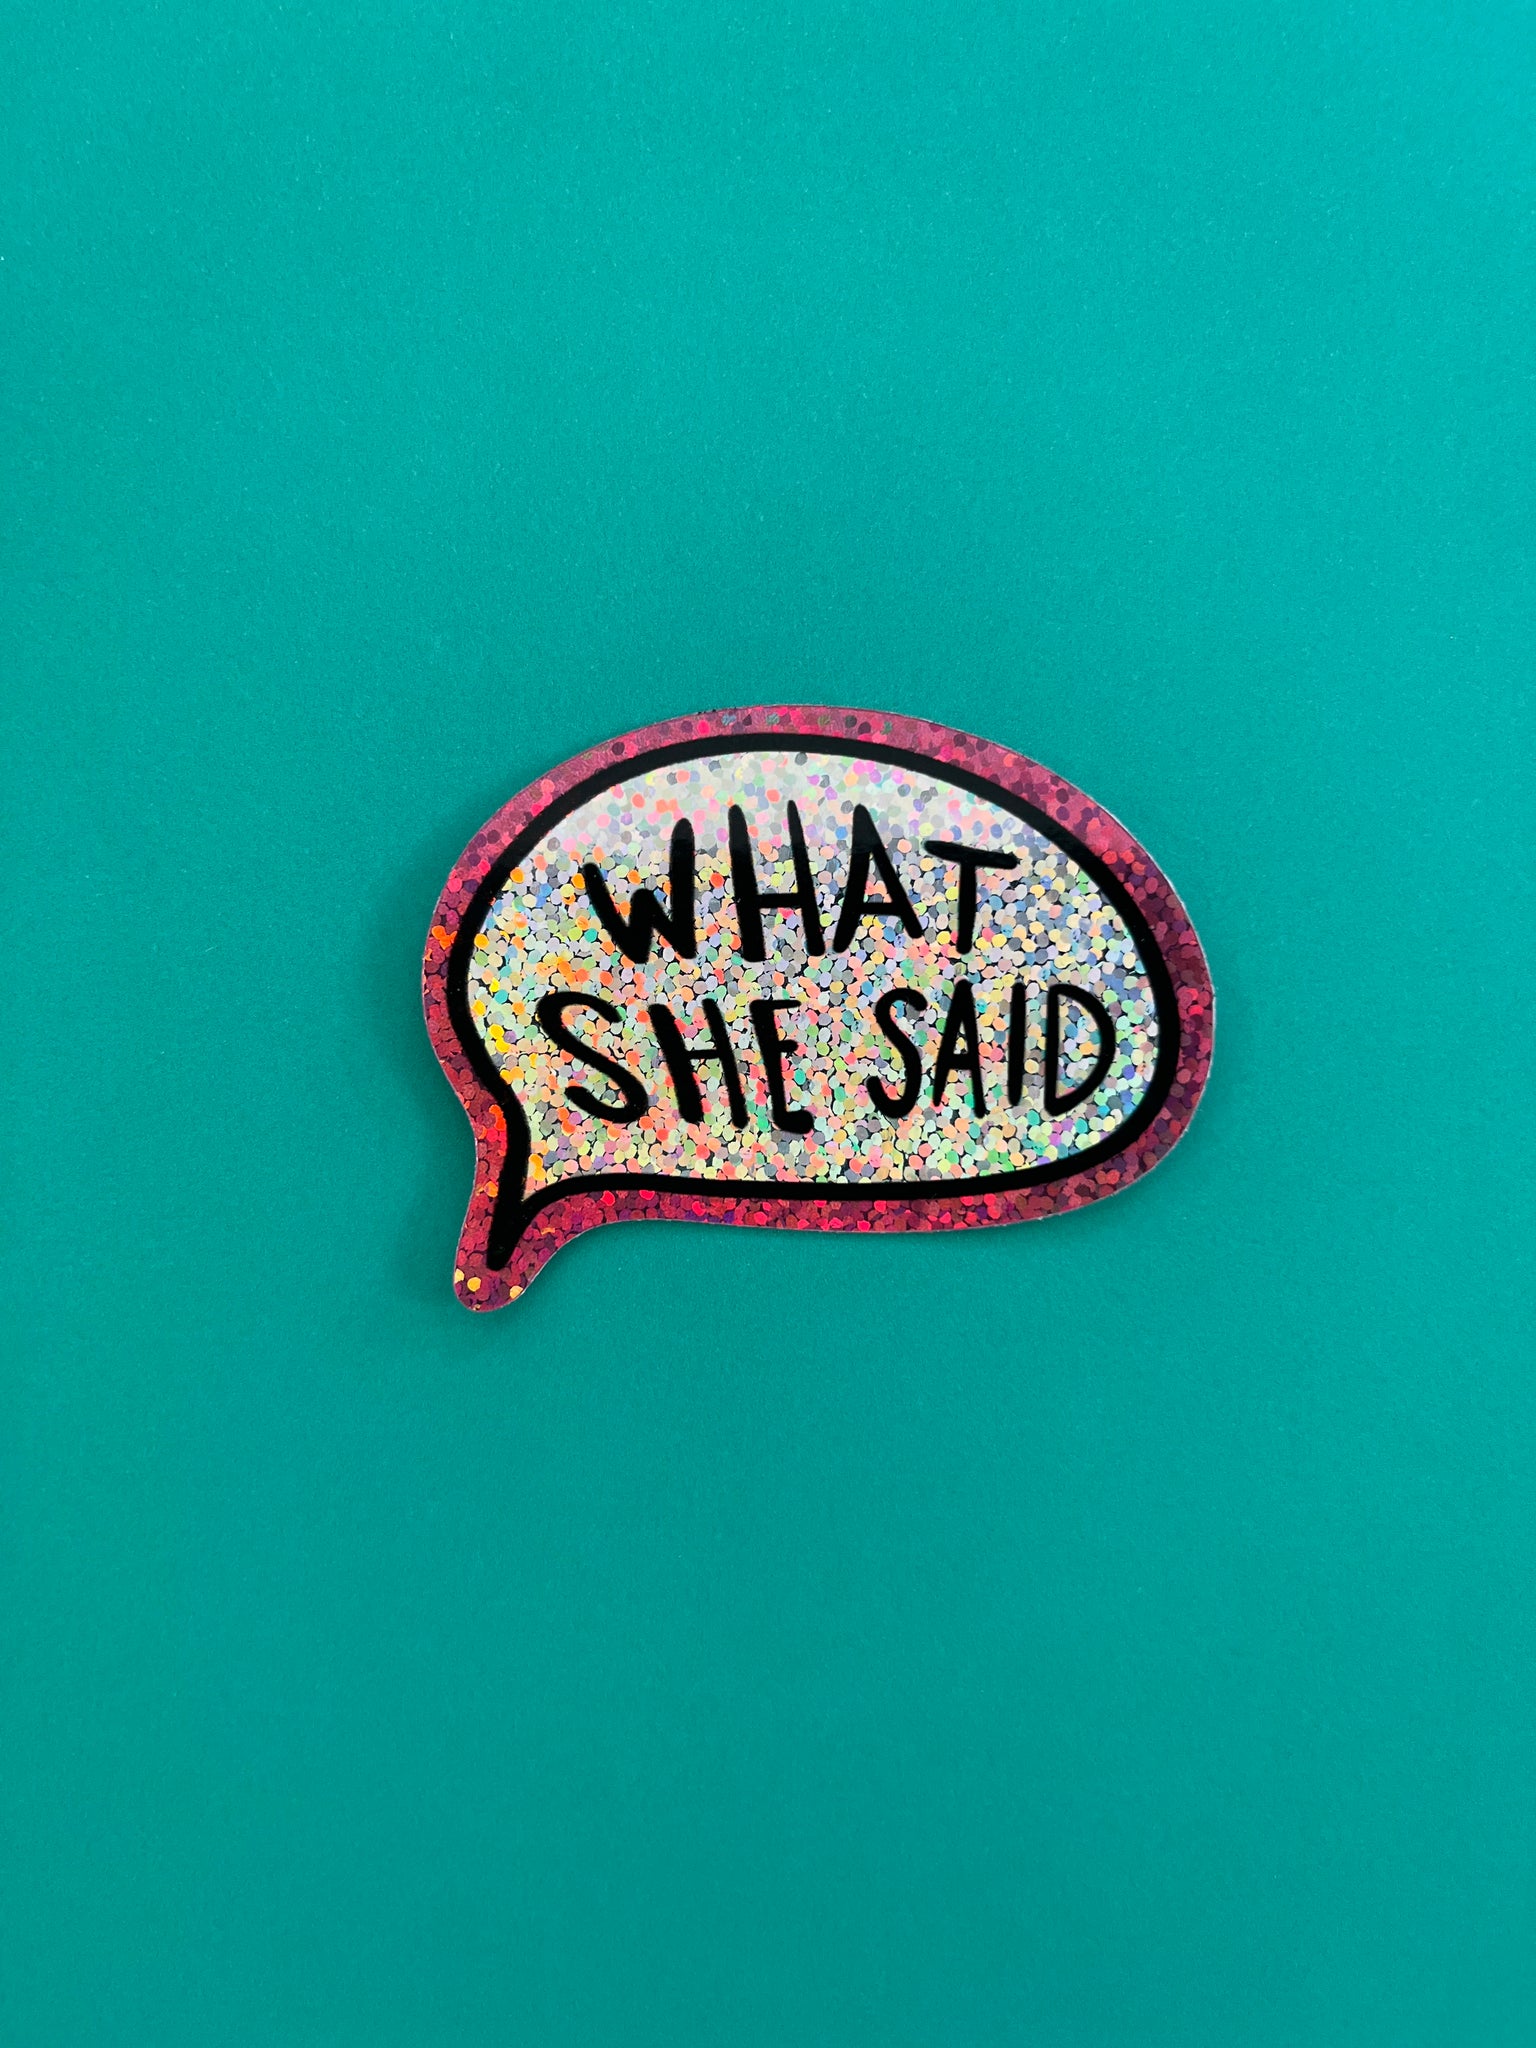 What She Said - holographic Sticker